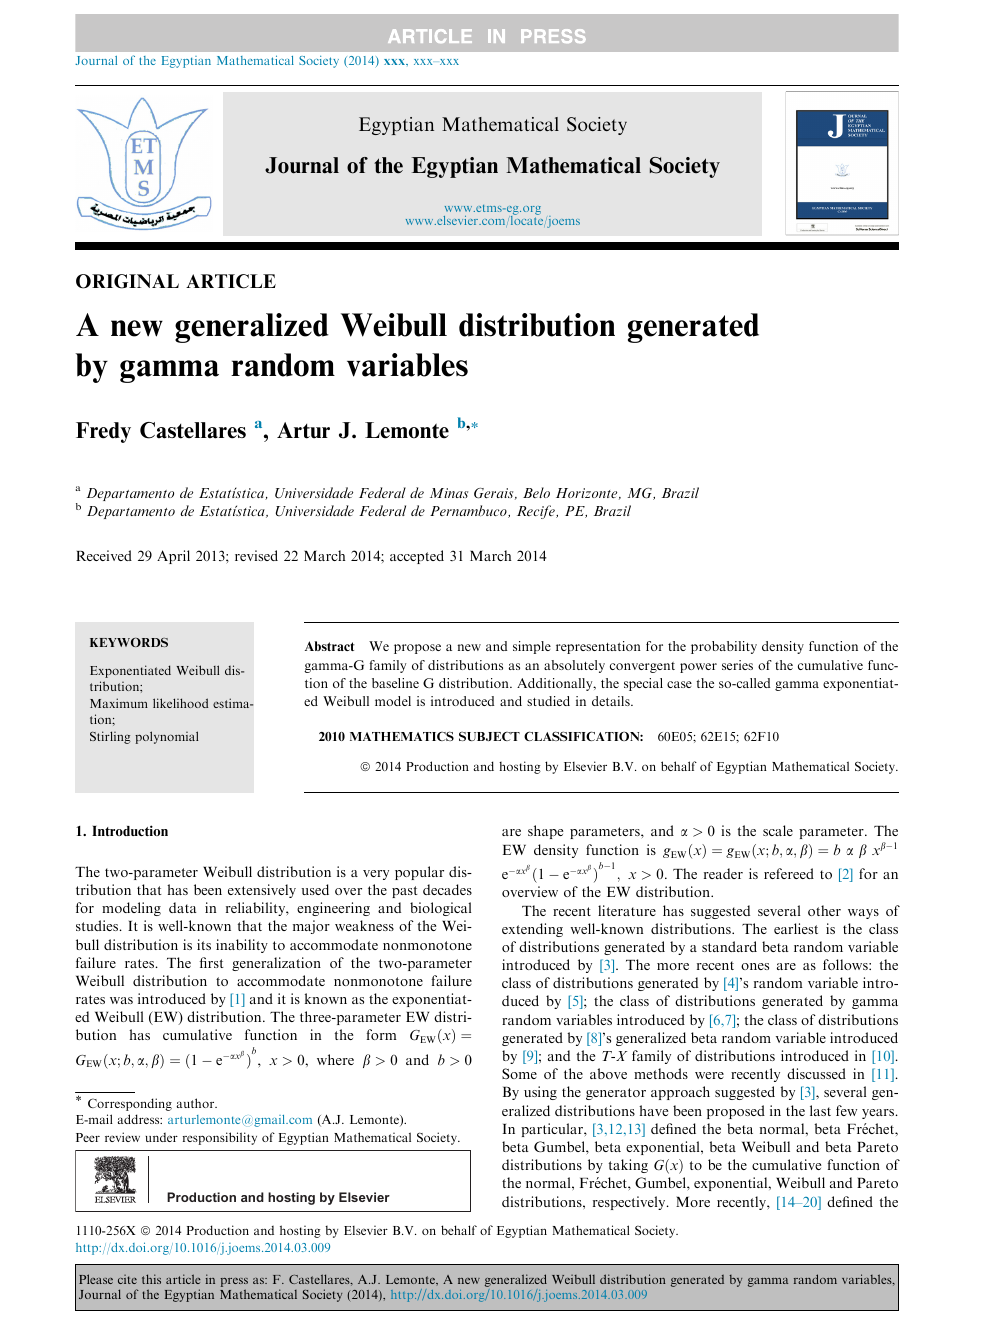 A New Generalized Weibull Distribution Generated By Gamma Random Variables Topic Of Research Paper In Mathematics Download Scholarly Article Pdf And Read For Free On Cyberleninka Open Science Hub